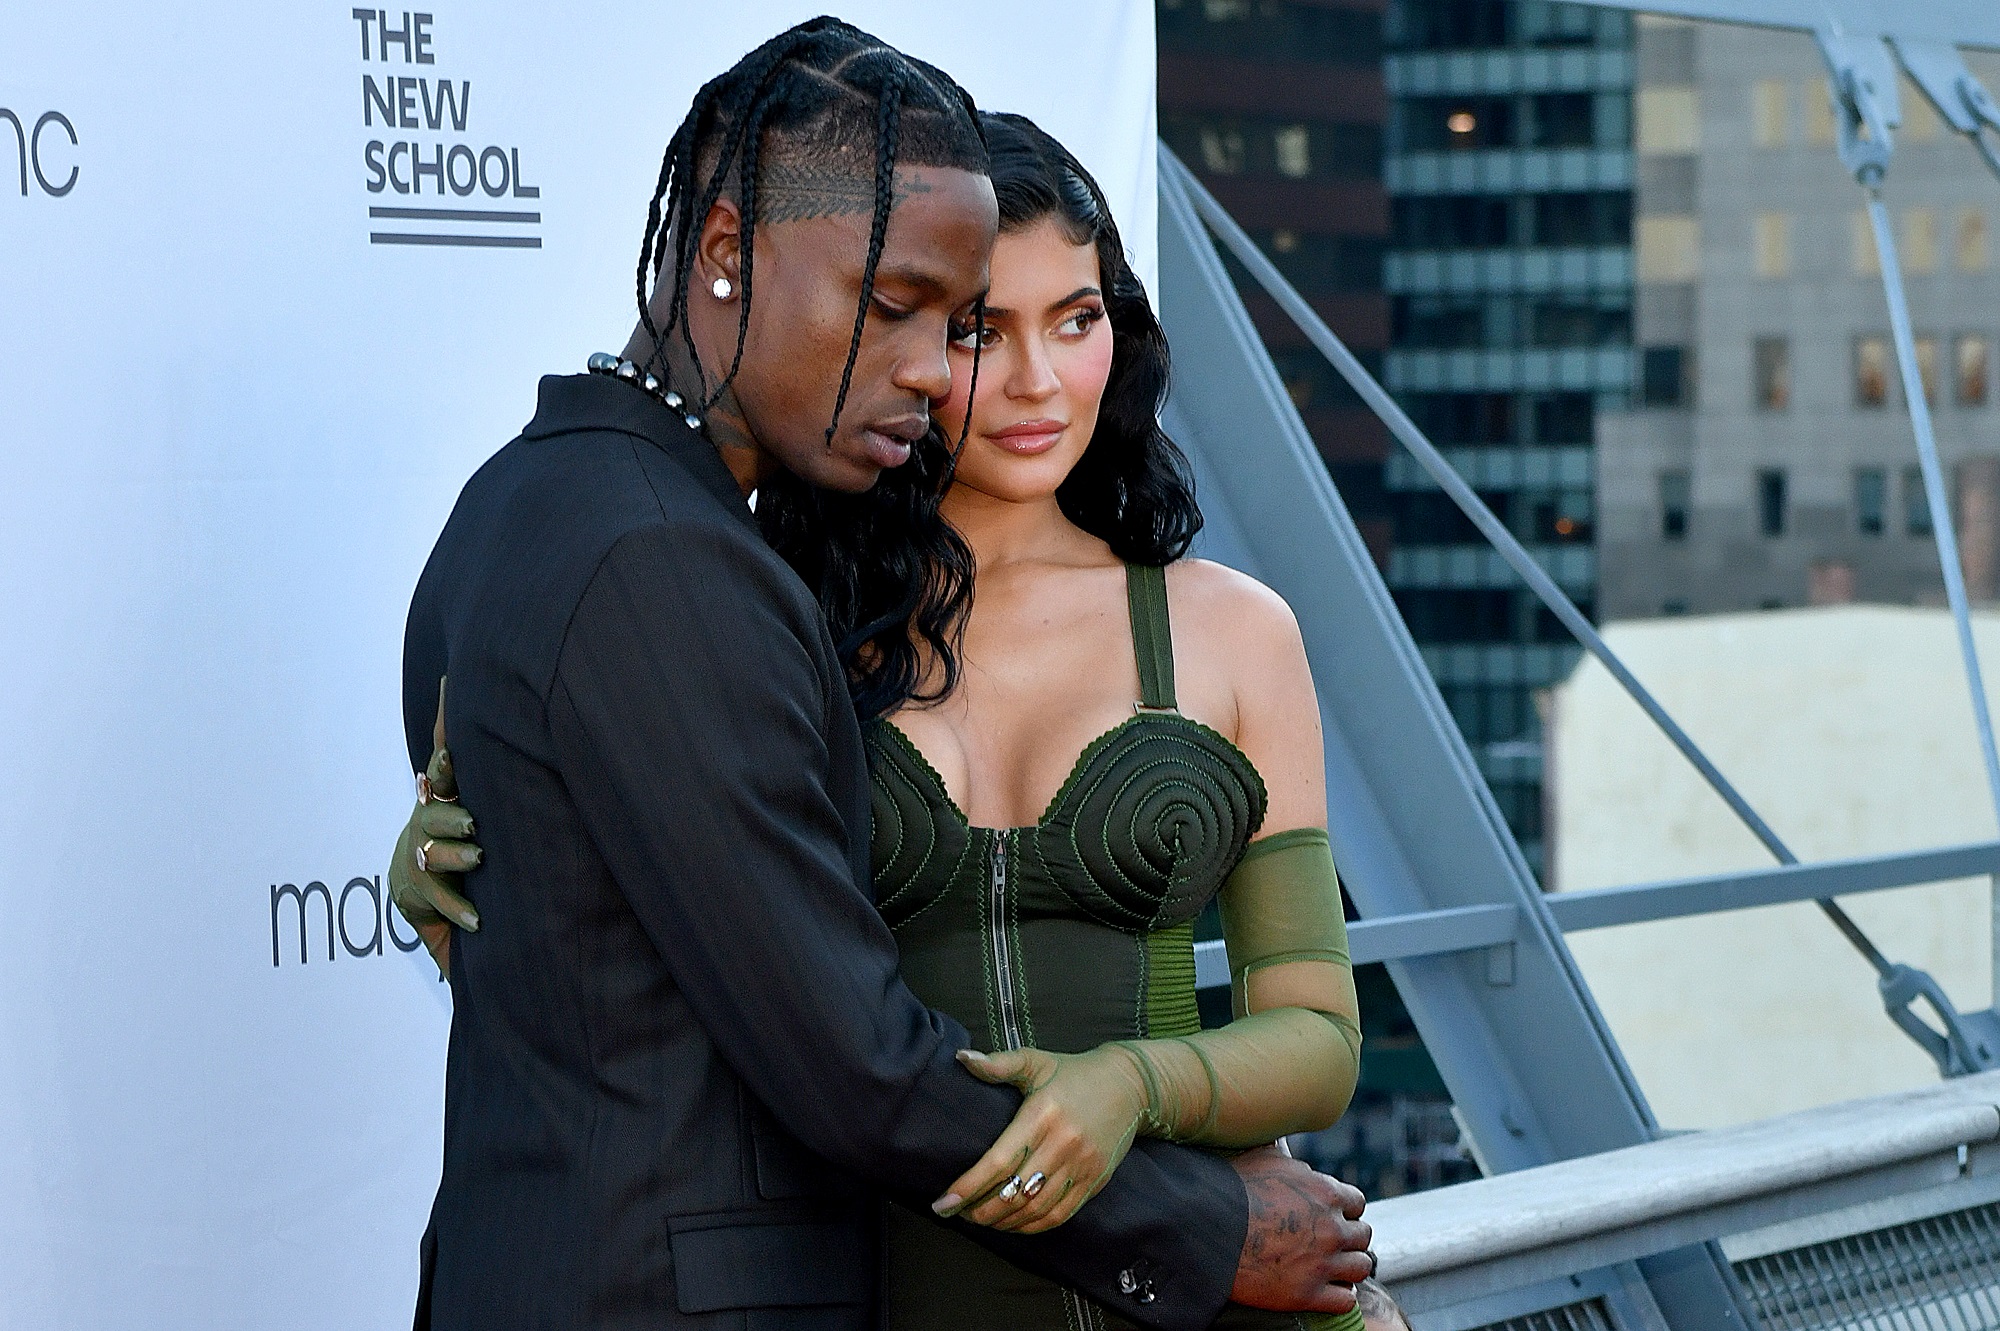 Travis Scott and Kylie Jenner (Image credits: Getty Images)